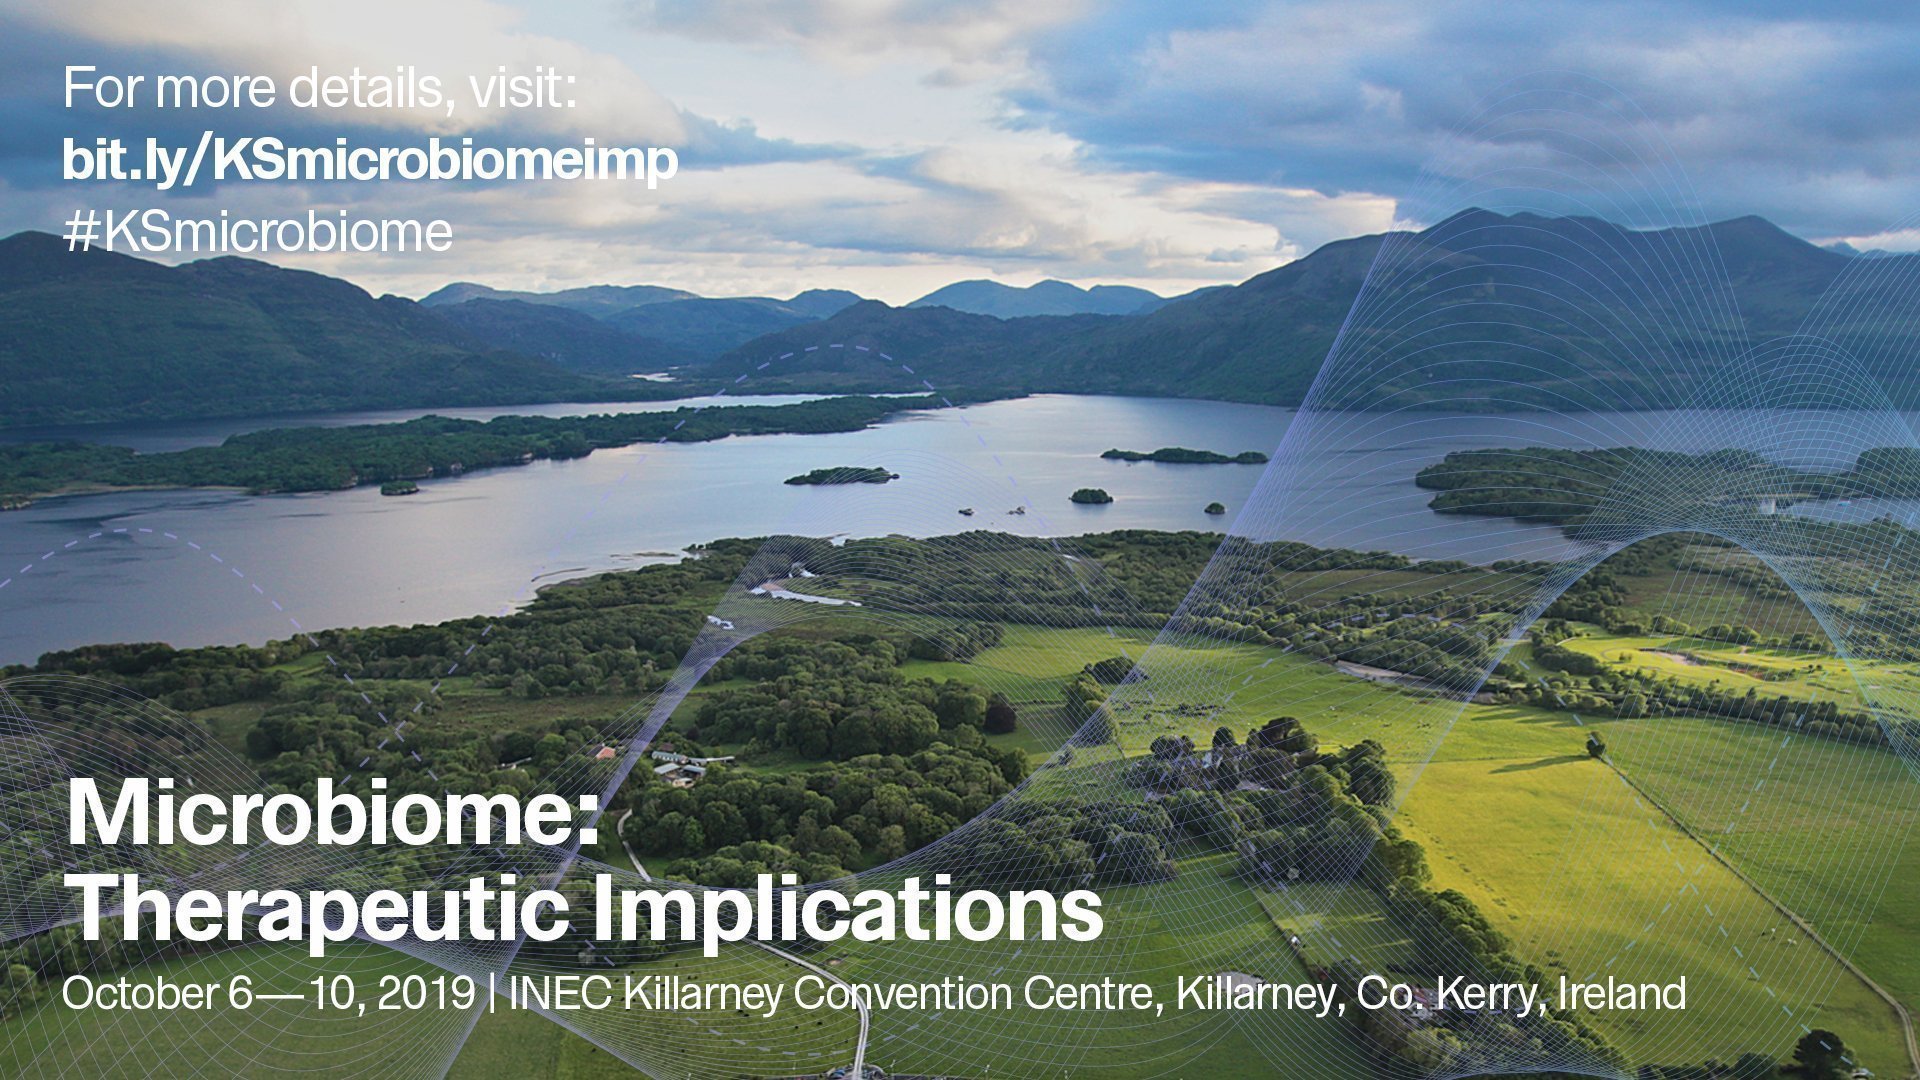 Meeting invite for meeting in Killarney Ireland: Microbiome: therapeutic implications from October 6th to the 10th. 